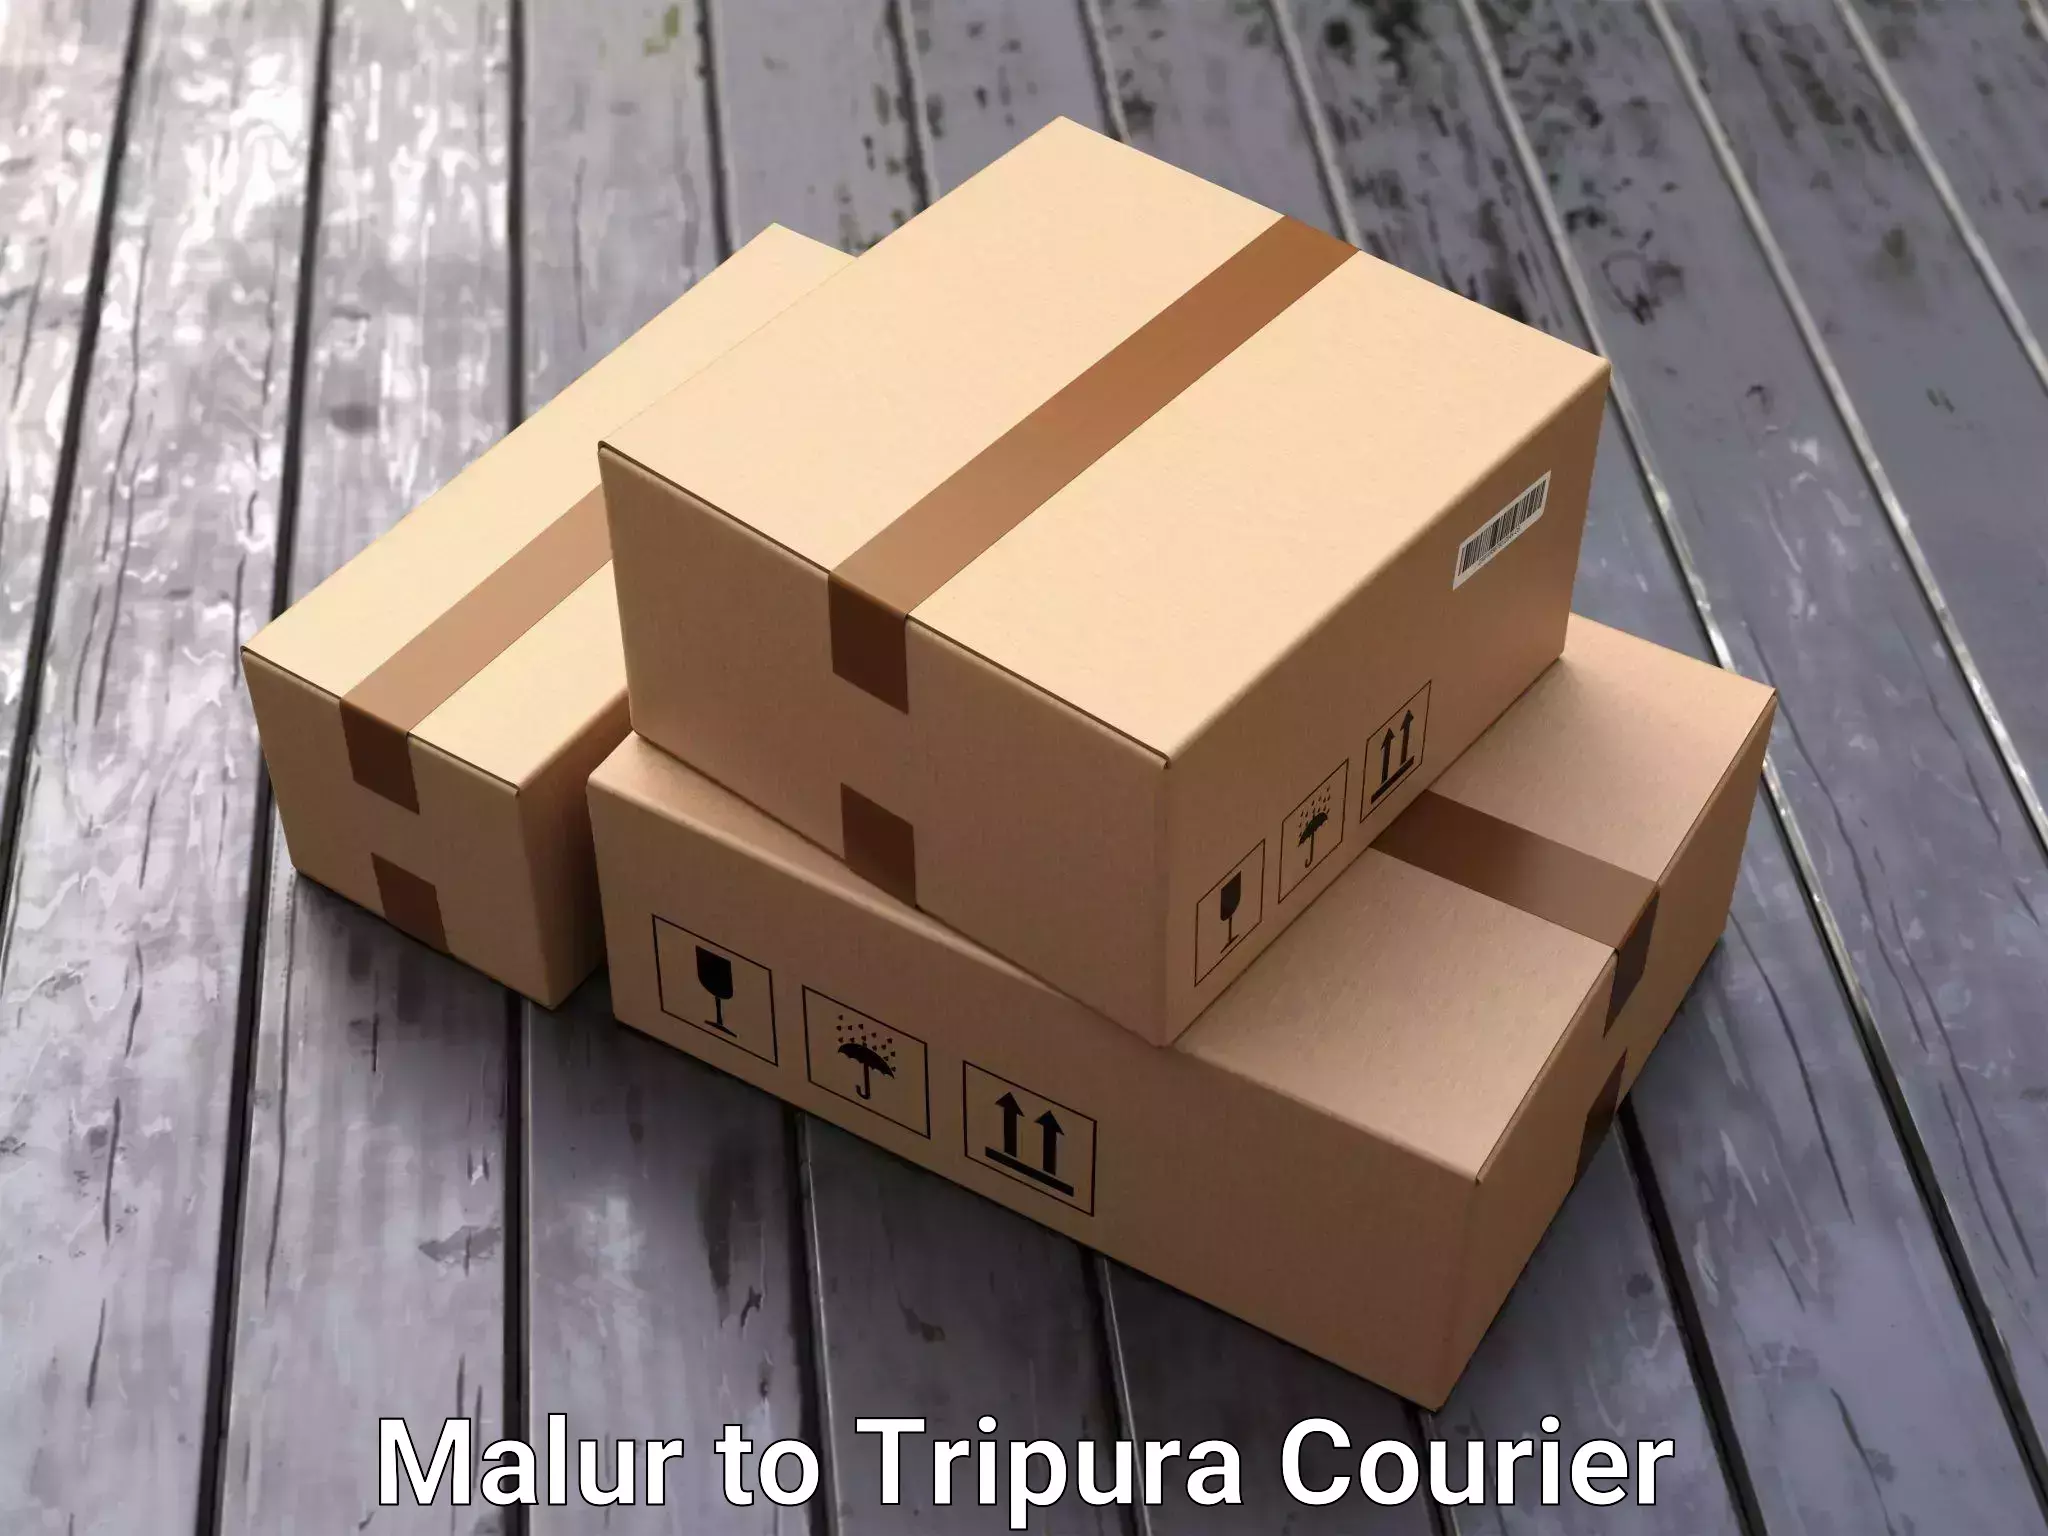 Quality relocation assistance Malur to Udaipur Tripura